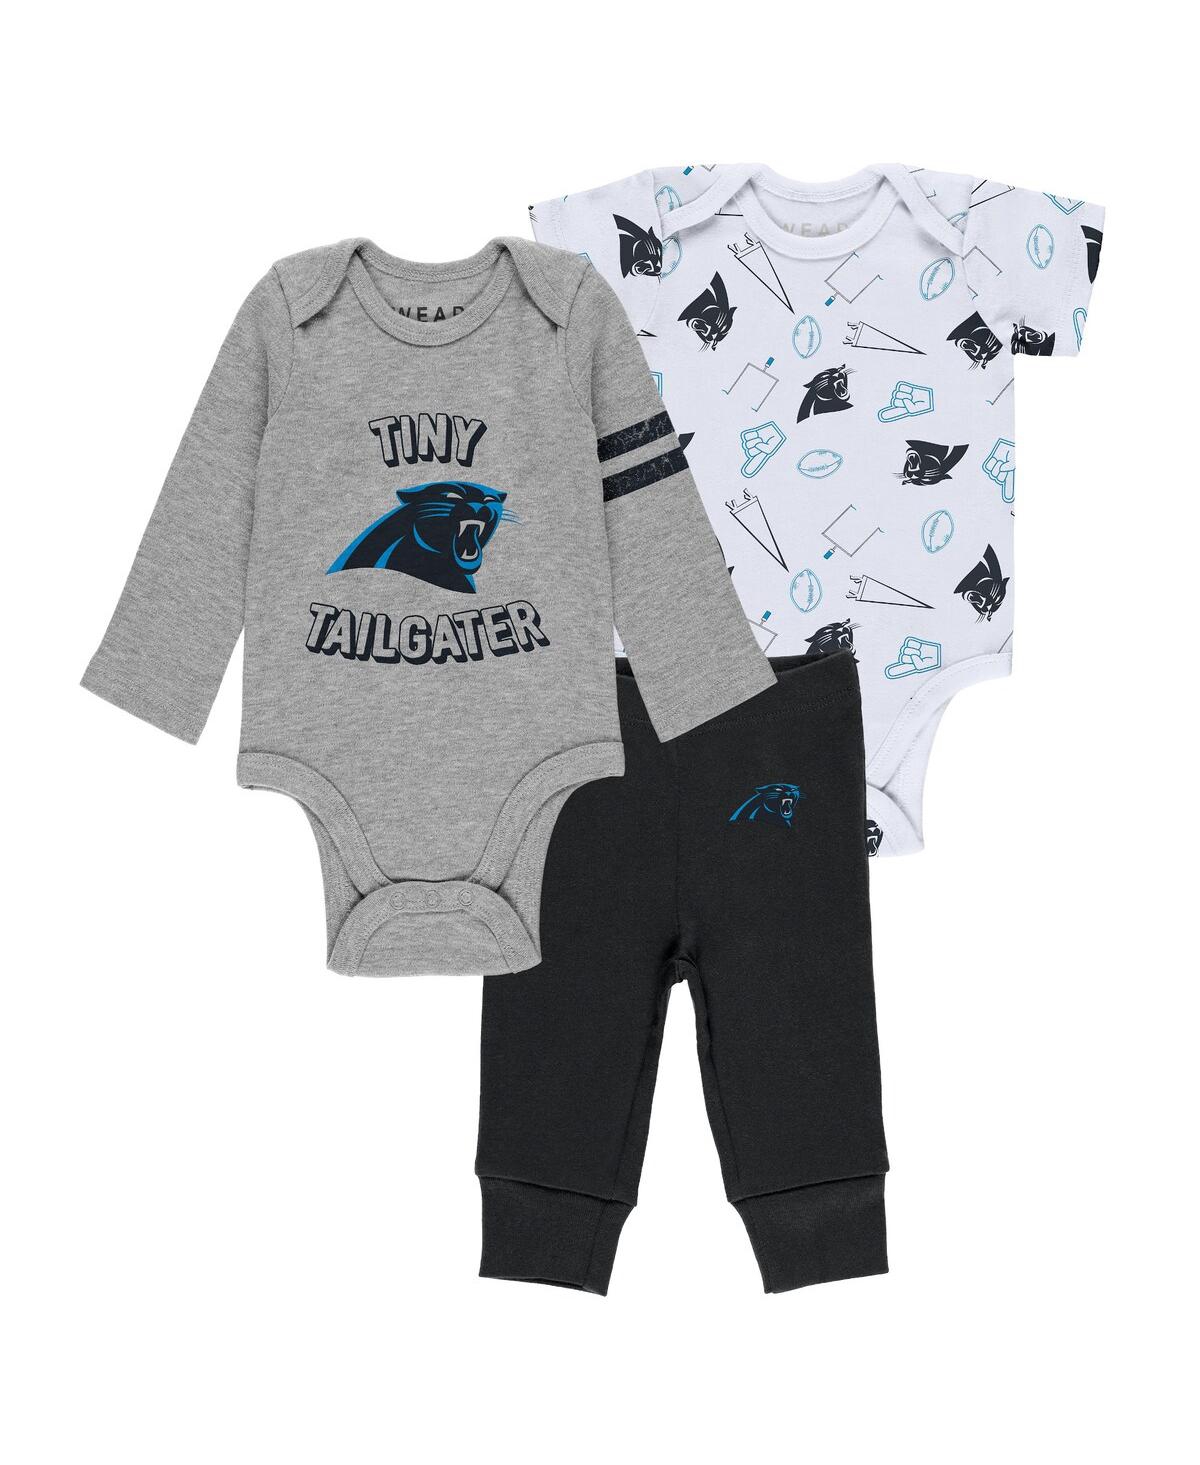 Wear By Erin Andrews Babies' Newborn And Infant Boys And Girls  Gray, Black, White Carolina Panthers Three-pi In Gray,black,white